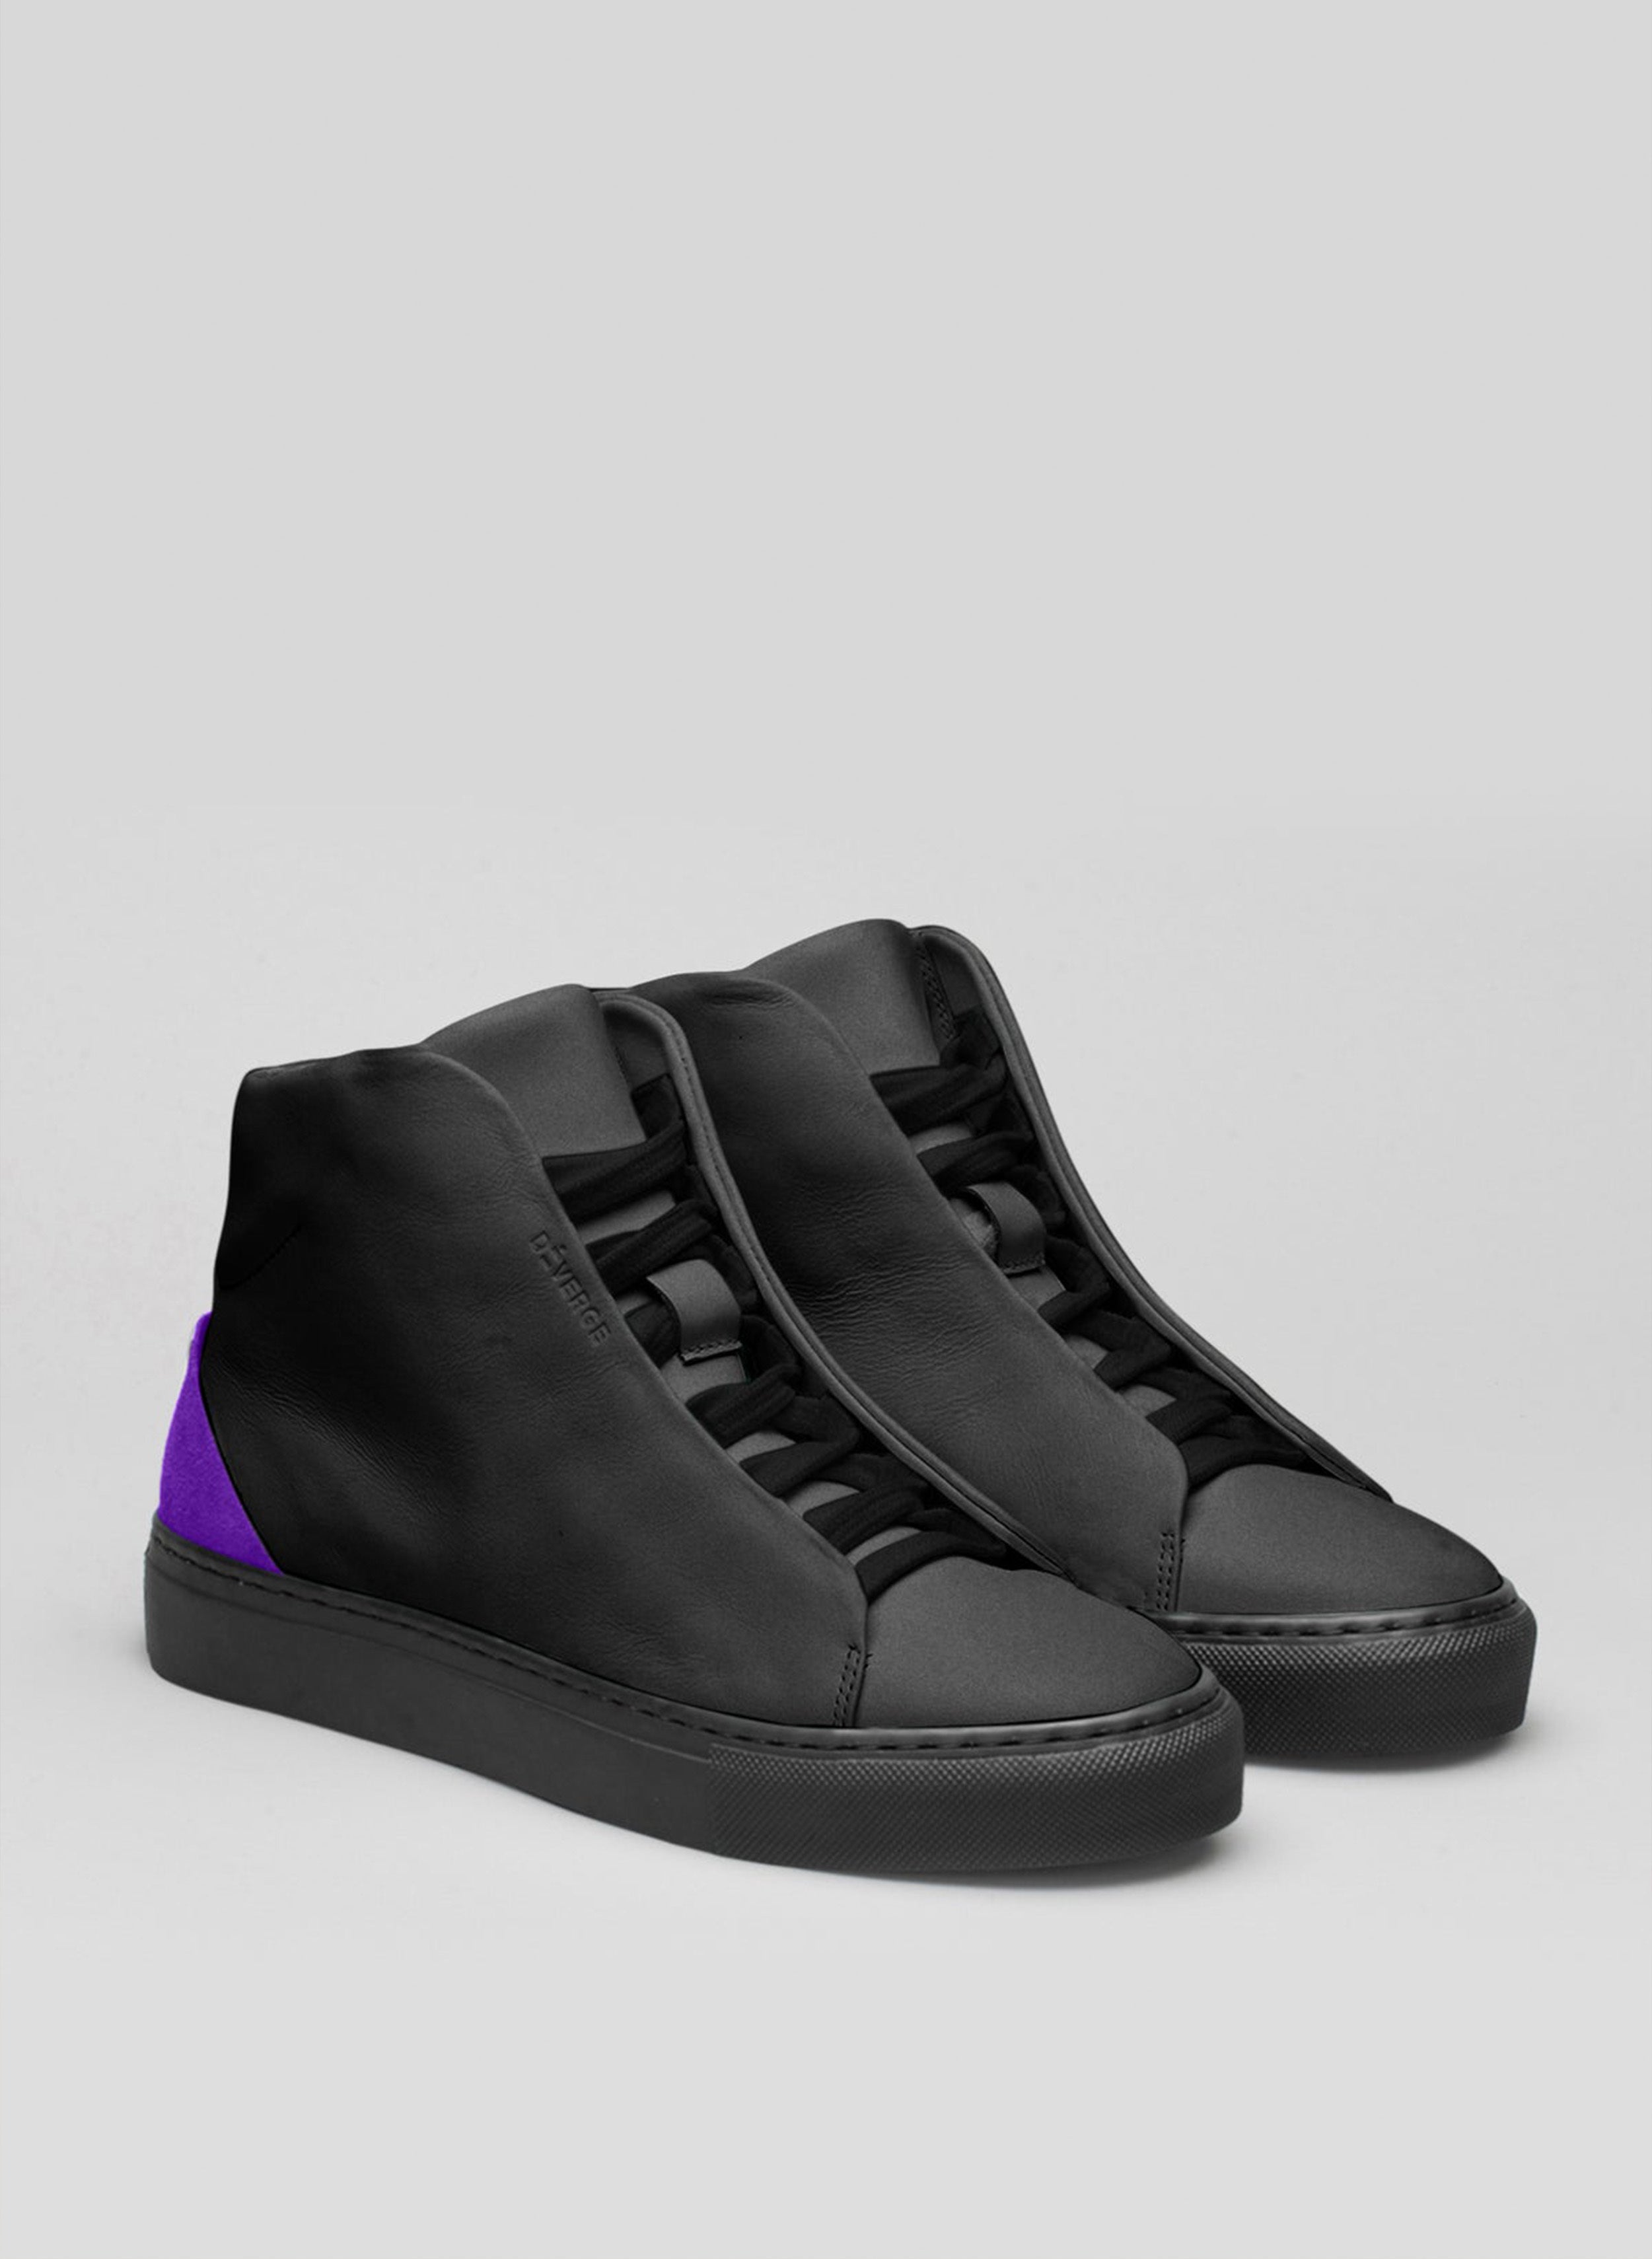 A pair of black and purple high top sneakers, showcasing custom shoes by Diverge.